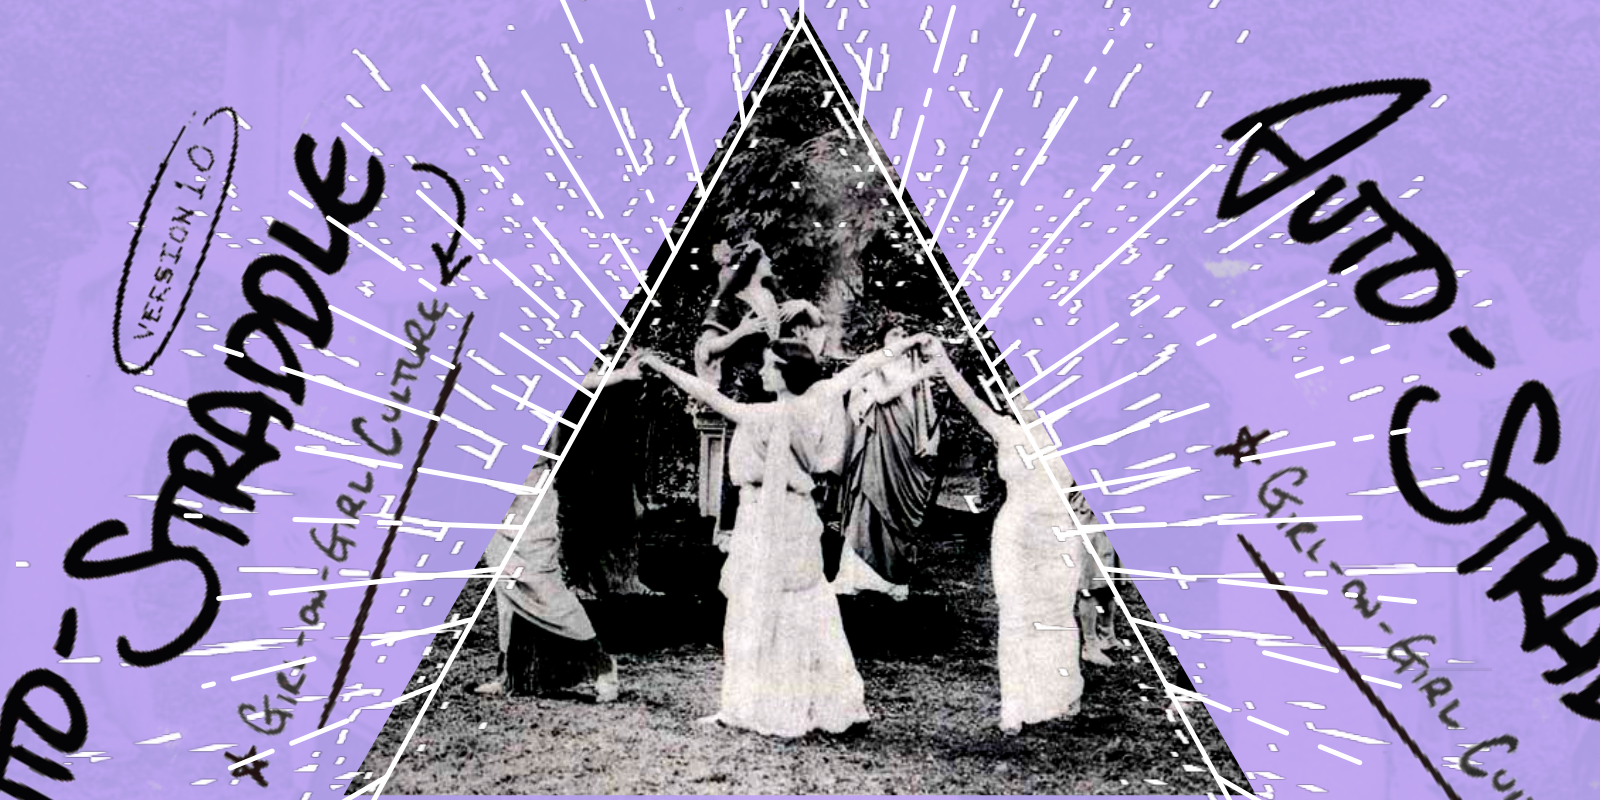 there is a vintage photo of Natalie Clifford Barney and her saphhic salon dance in a circle in her yard, within a triangle and decorative lines radiating from the triangle against a lavender background